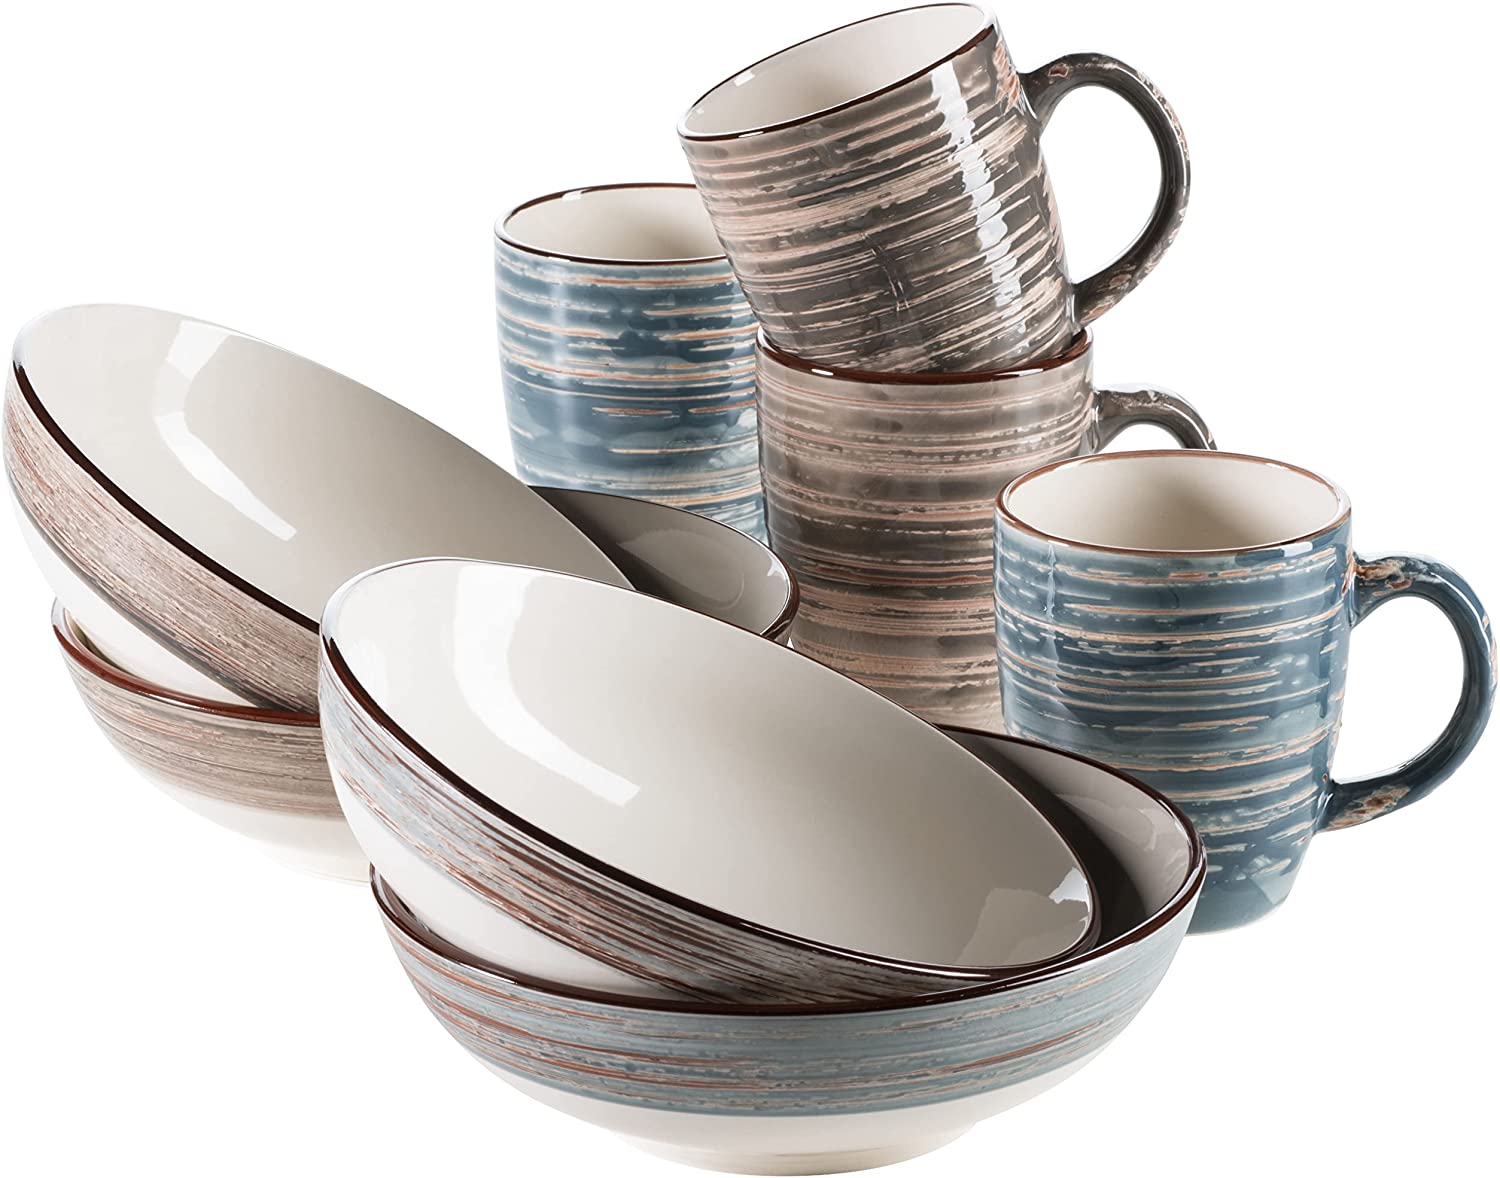 Mäser 931392 Duo Series 4 Coffee Cups and 4 Large Cereal Bowls in Shabby Chic Vintage Design Ceramic Blue / Brown